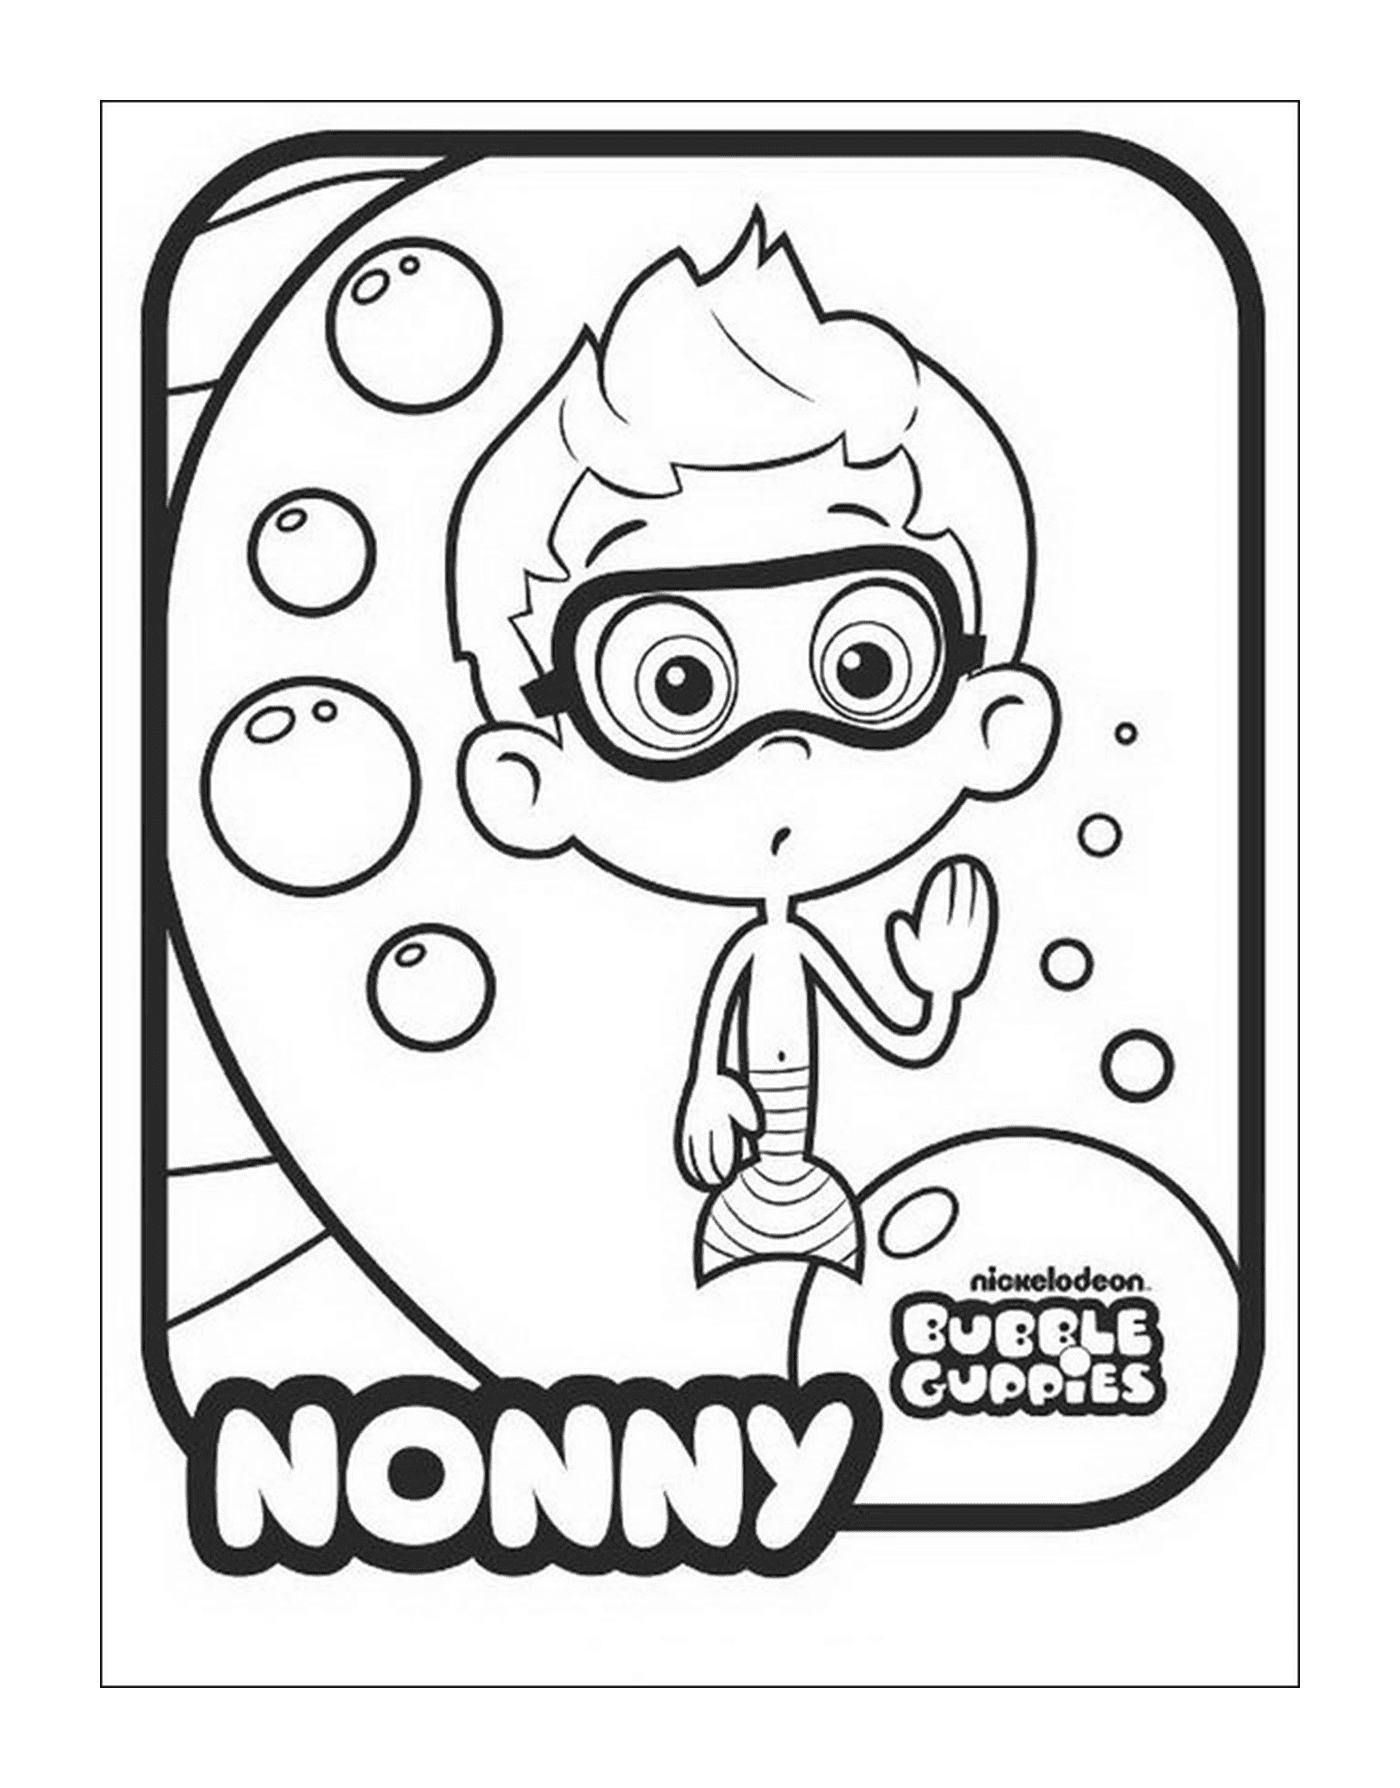  Nonny of the Bubble Guppies 